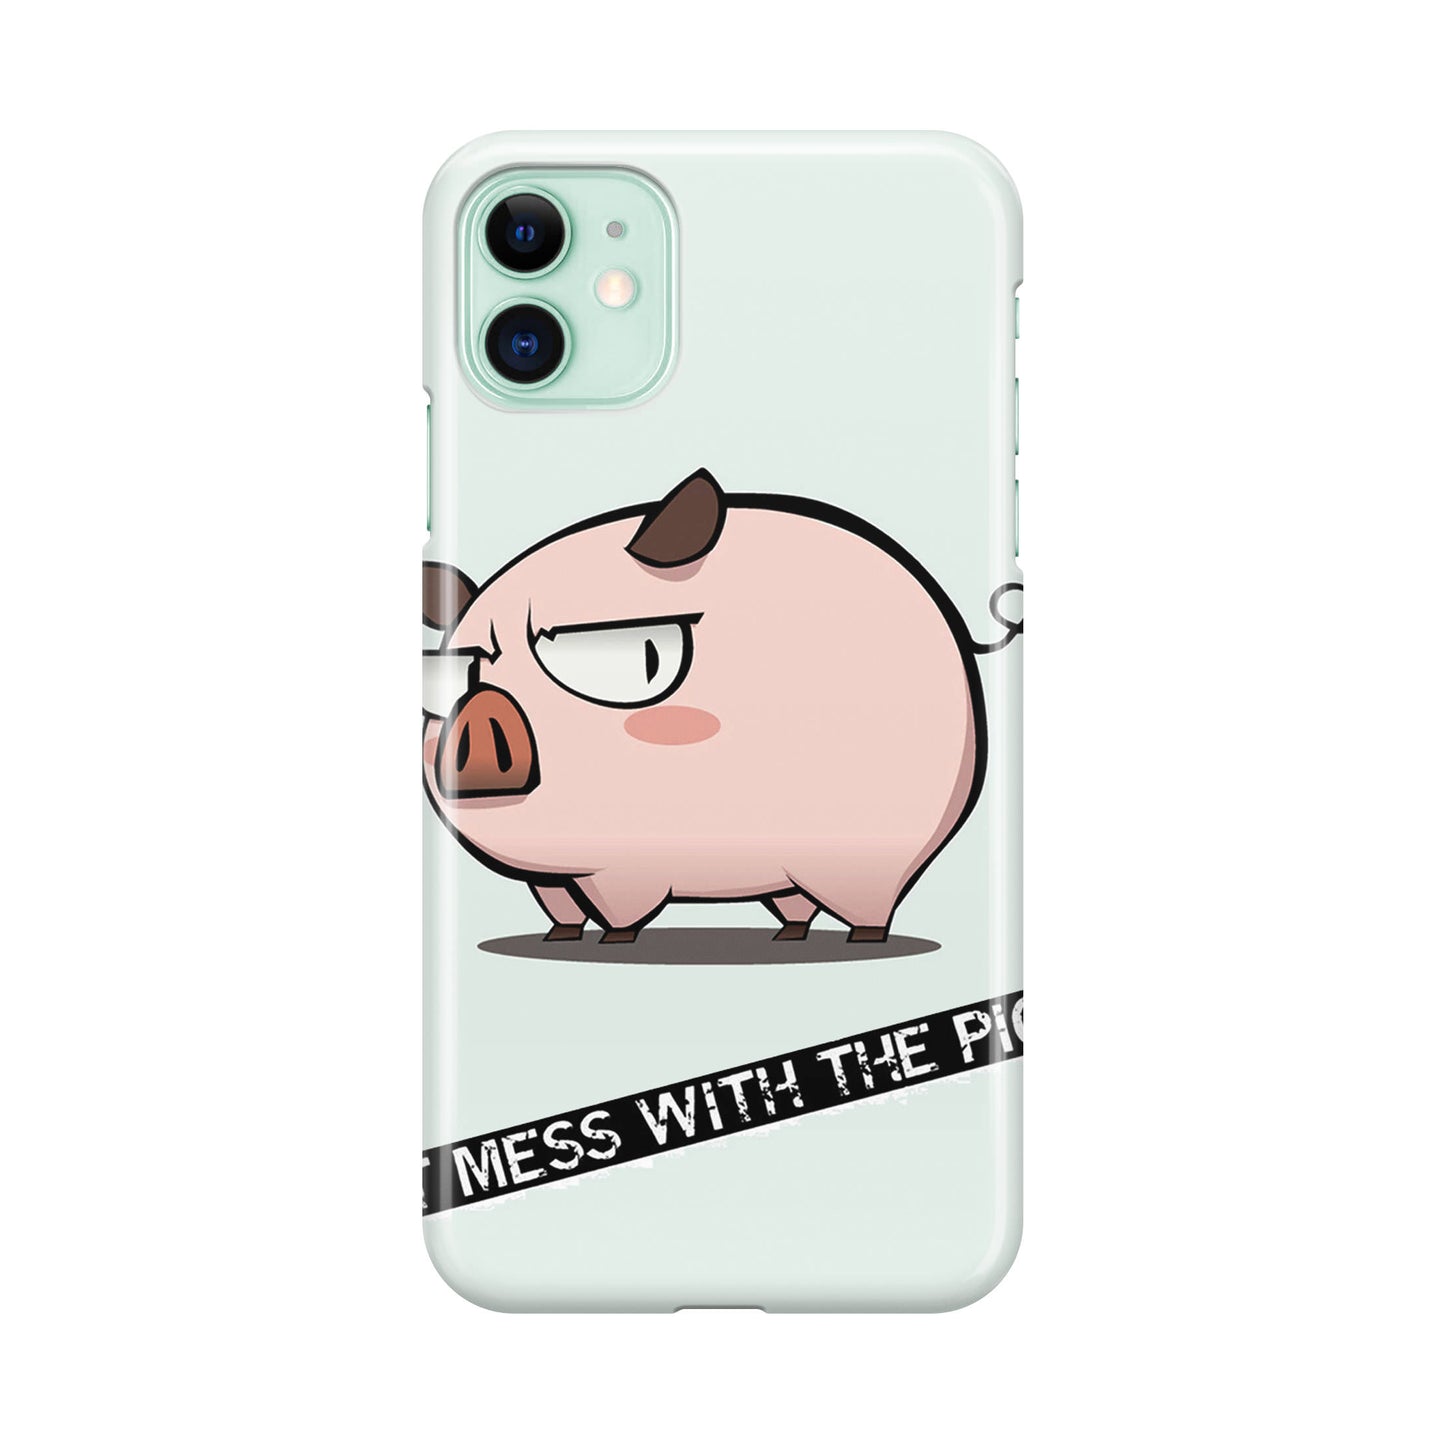 Dont Mess With The Pig iPhone 12 Case